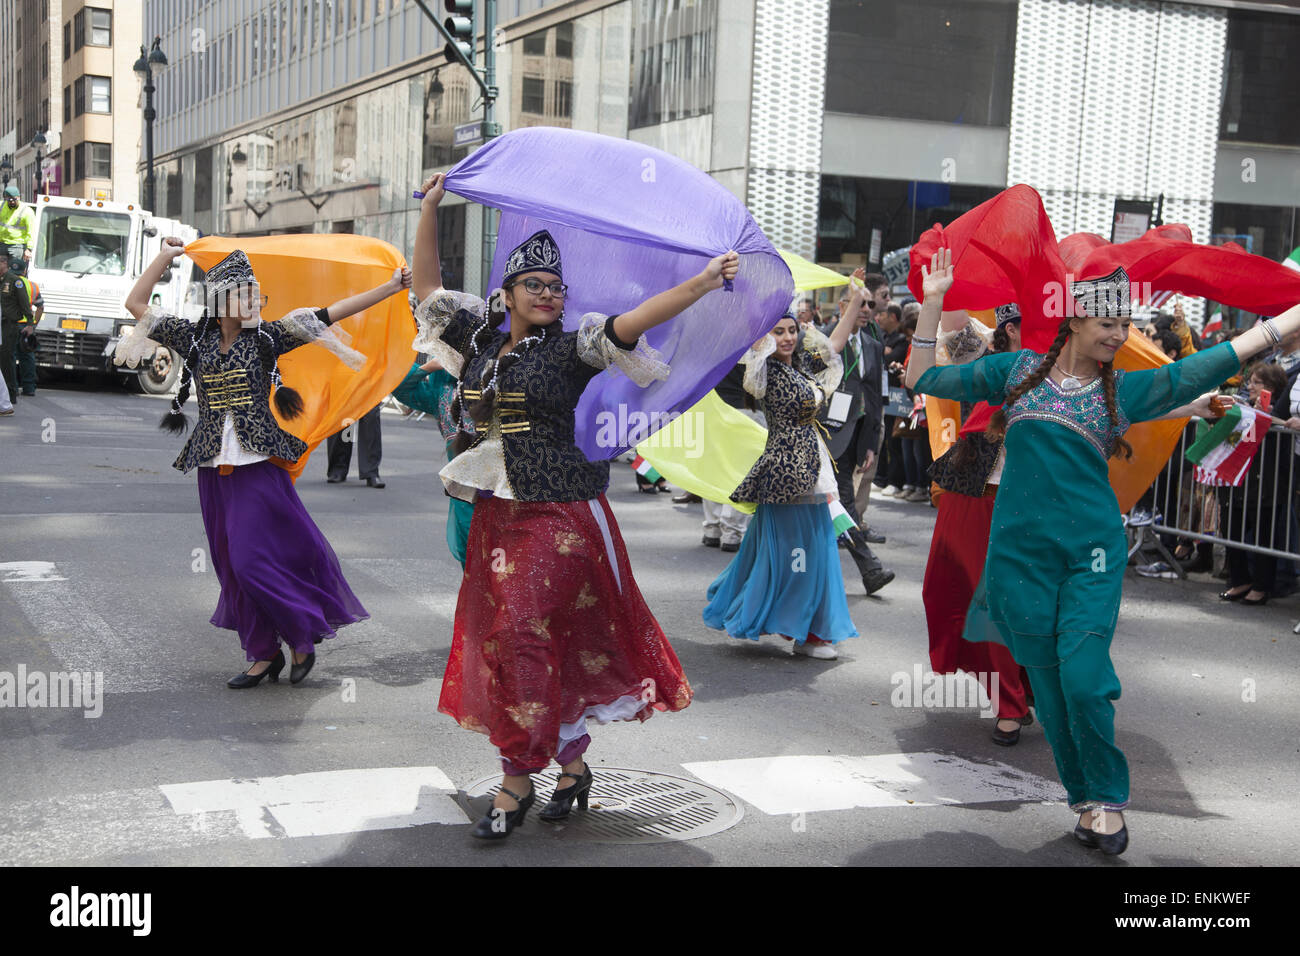 The annual Persian Parade on Madison Avenue in NYC celebrates Nowruz